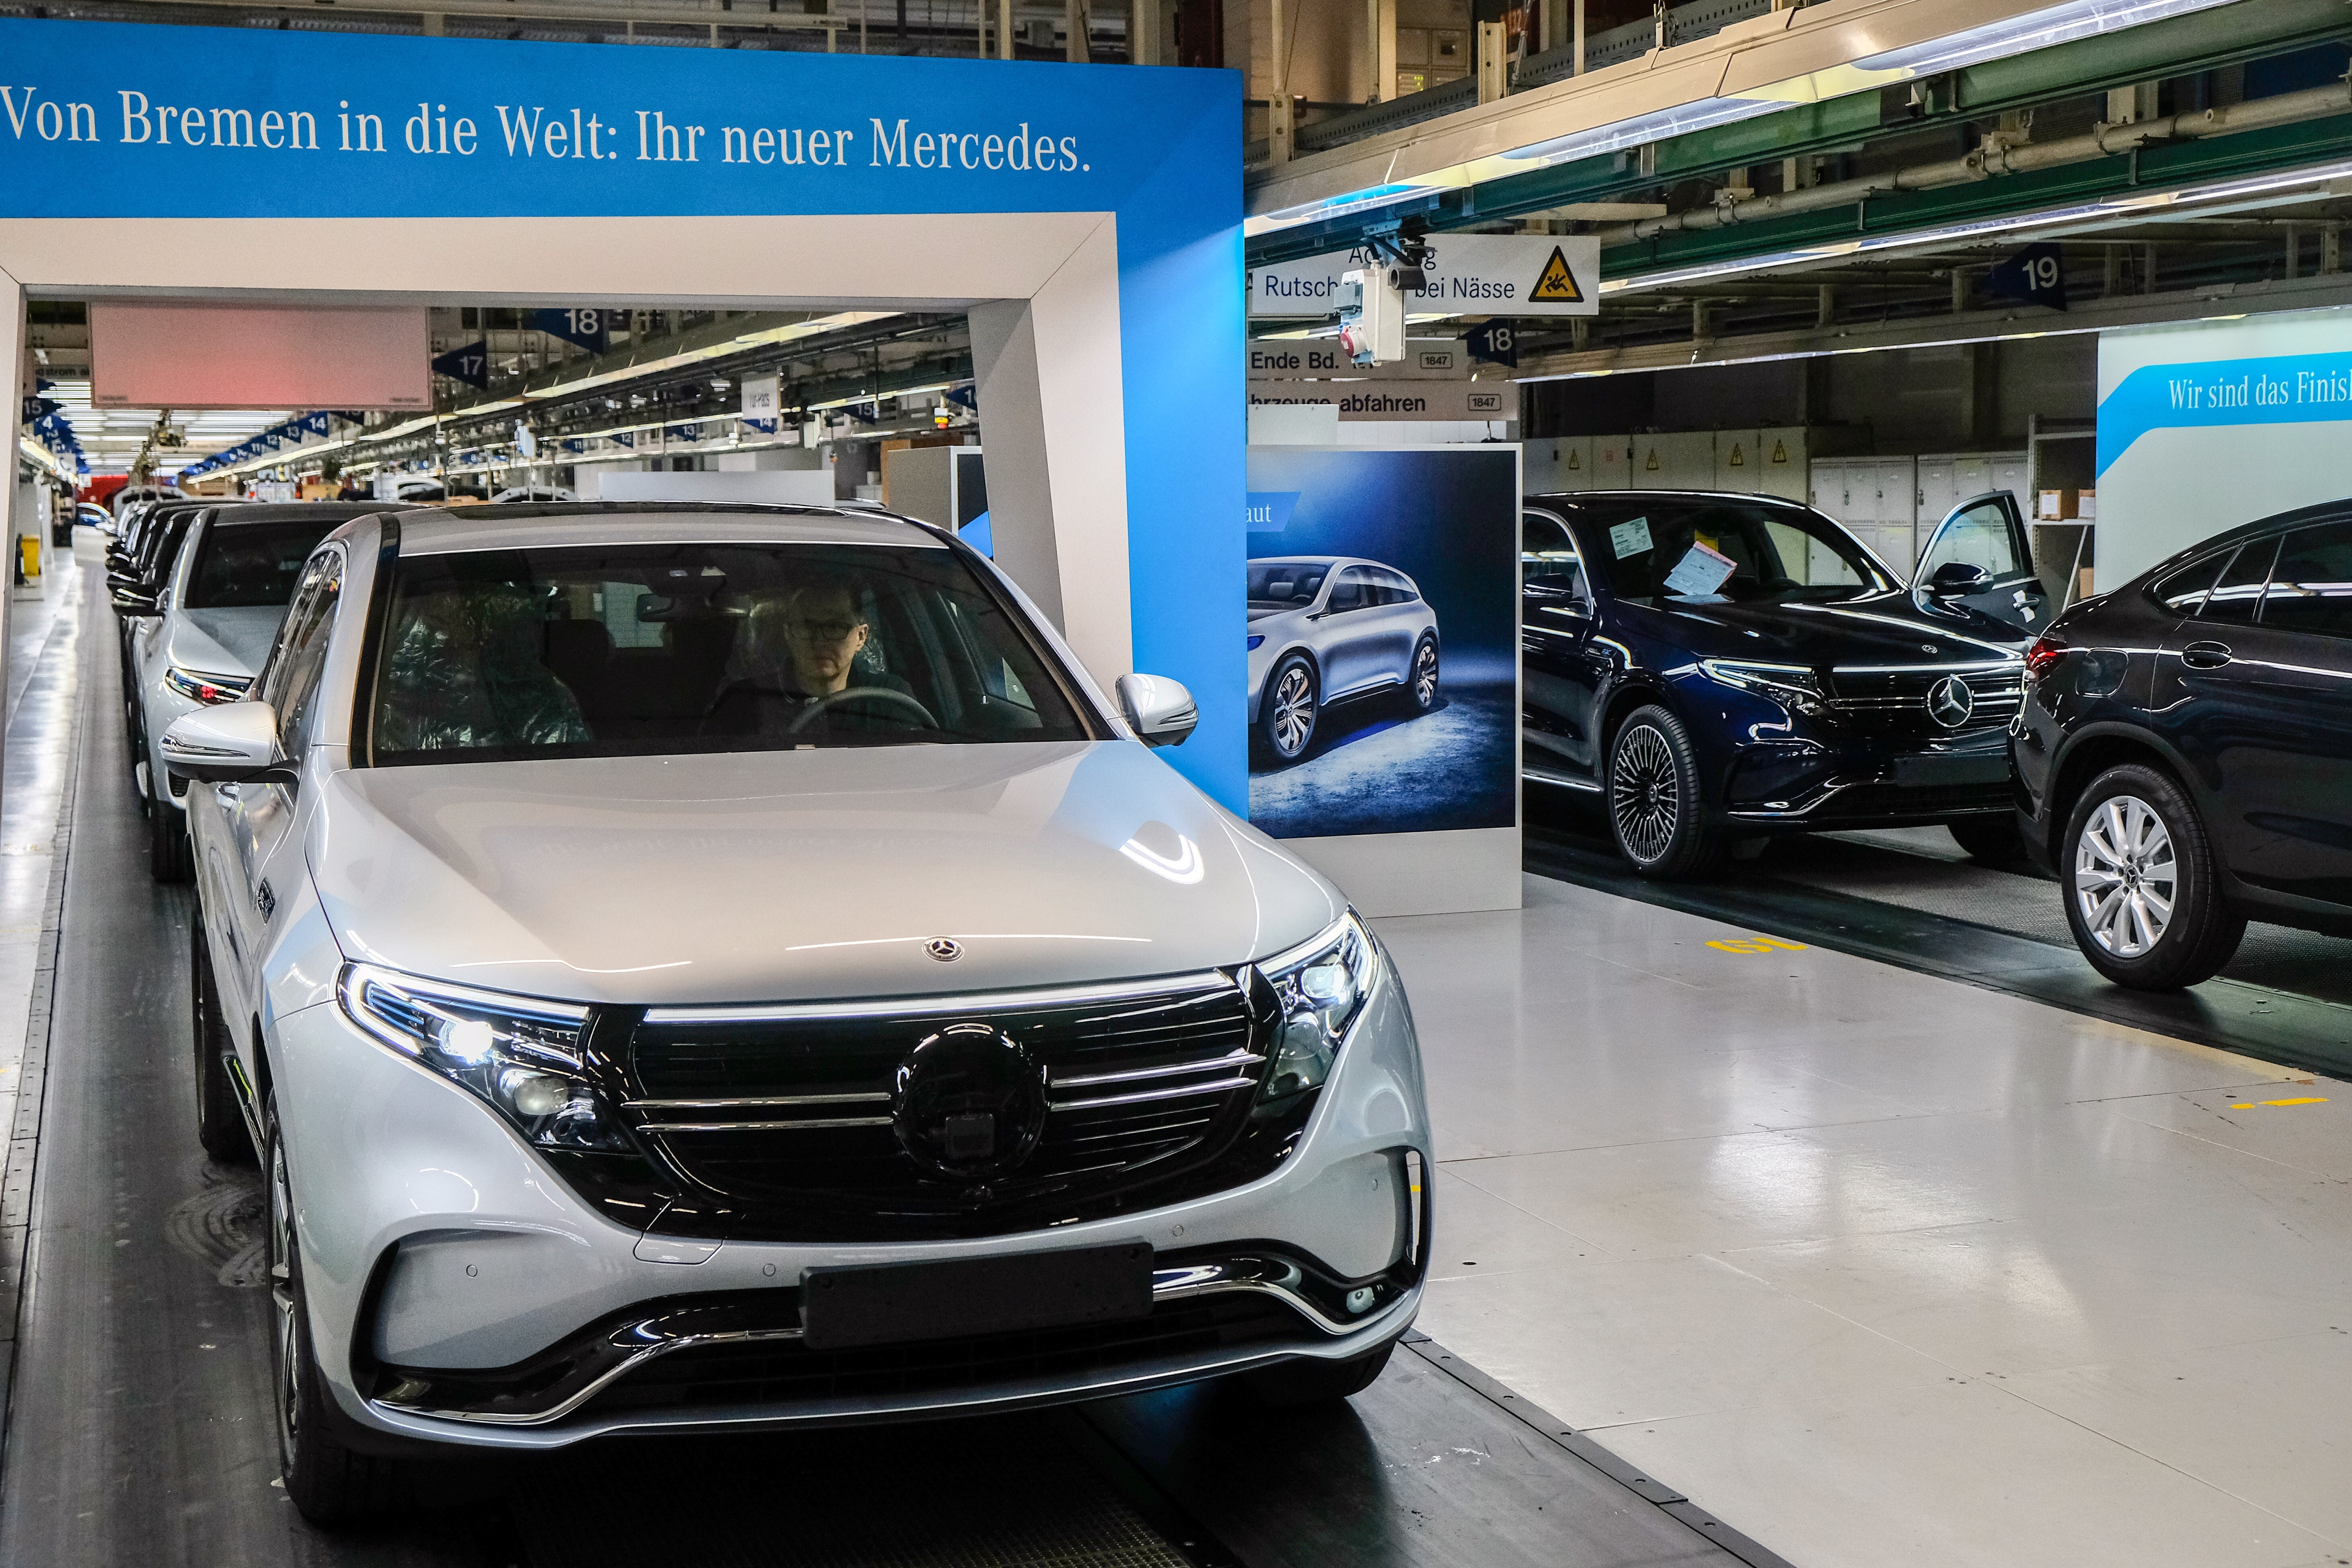 In China, Mercedes-Benz sold 774,000 units in 2020, representing an 11.7 per cent increase from the previous year. Photo: AFP